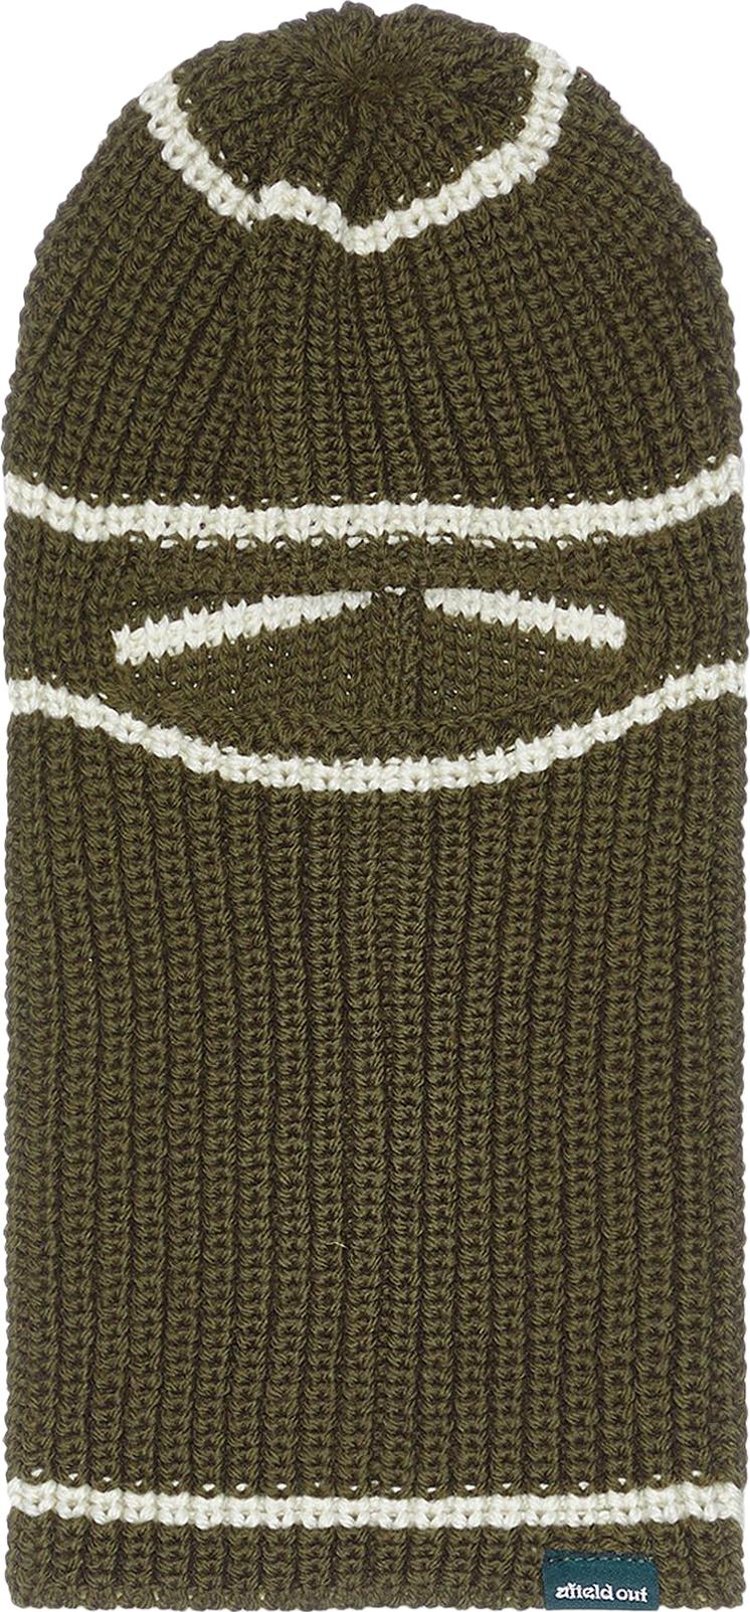 Afield Out Striped Balaclava 'Army Green'